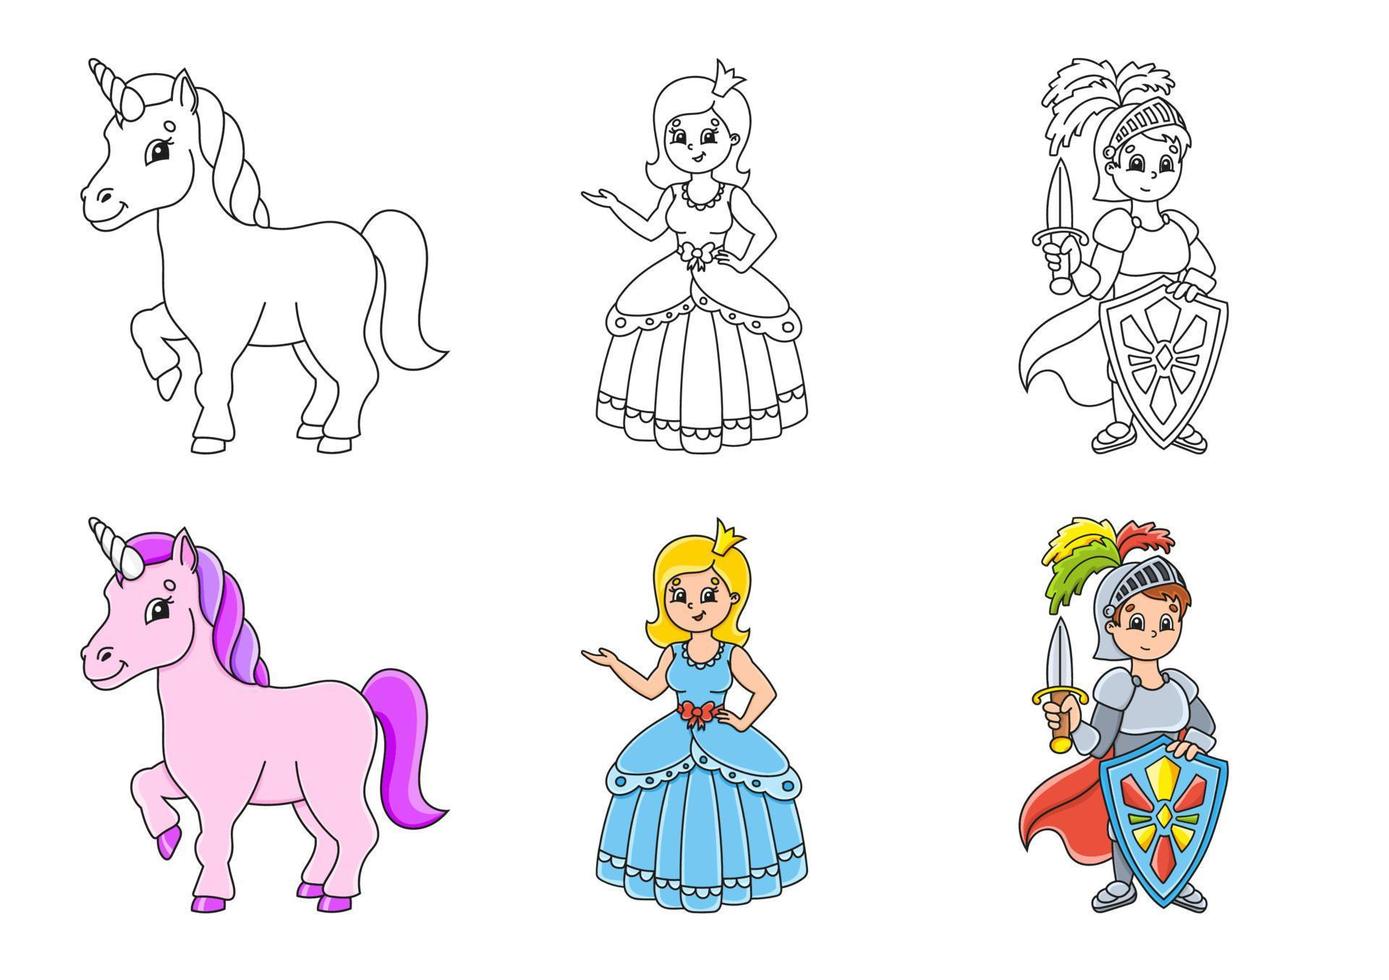 Set coloring page for kids. Fairytale theme. Cute cartoon characters. Black stroke. With sample. Vector illustration.